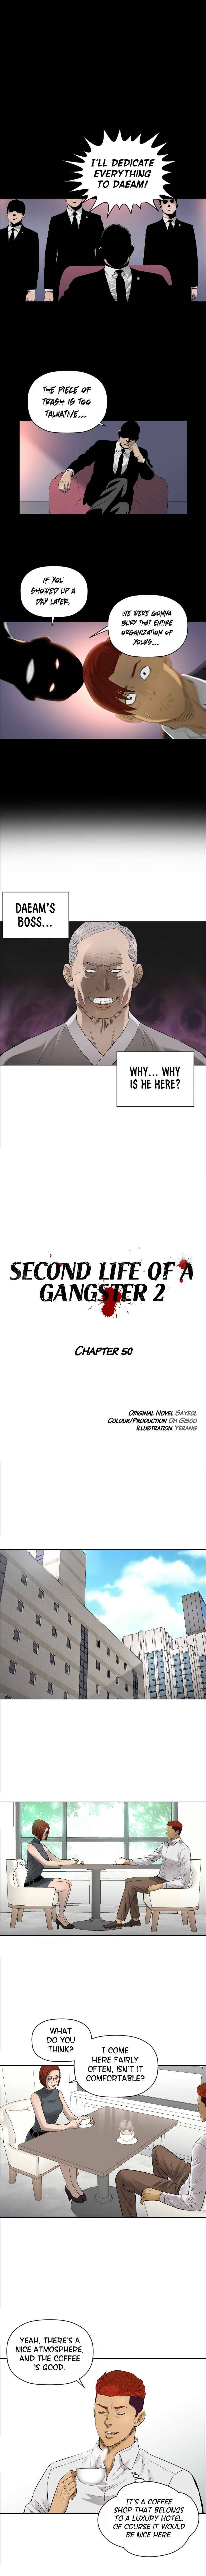 Second life of a Gangster Chapter 101 - Page 2